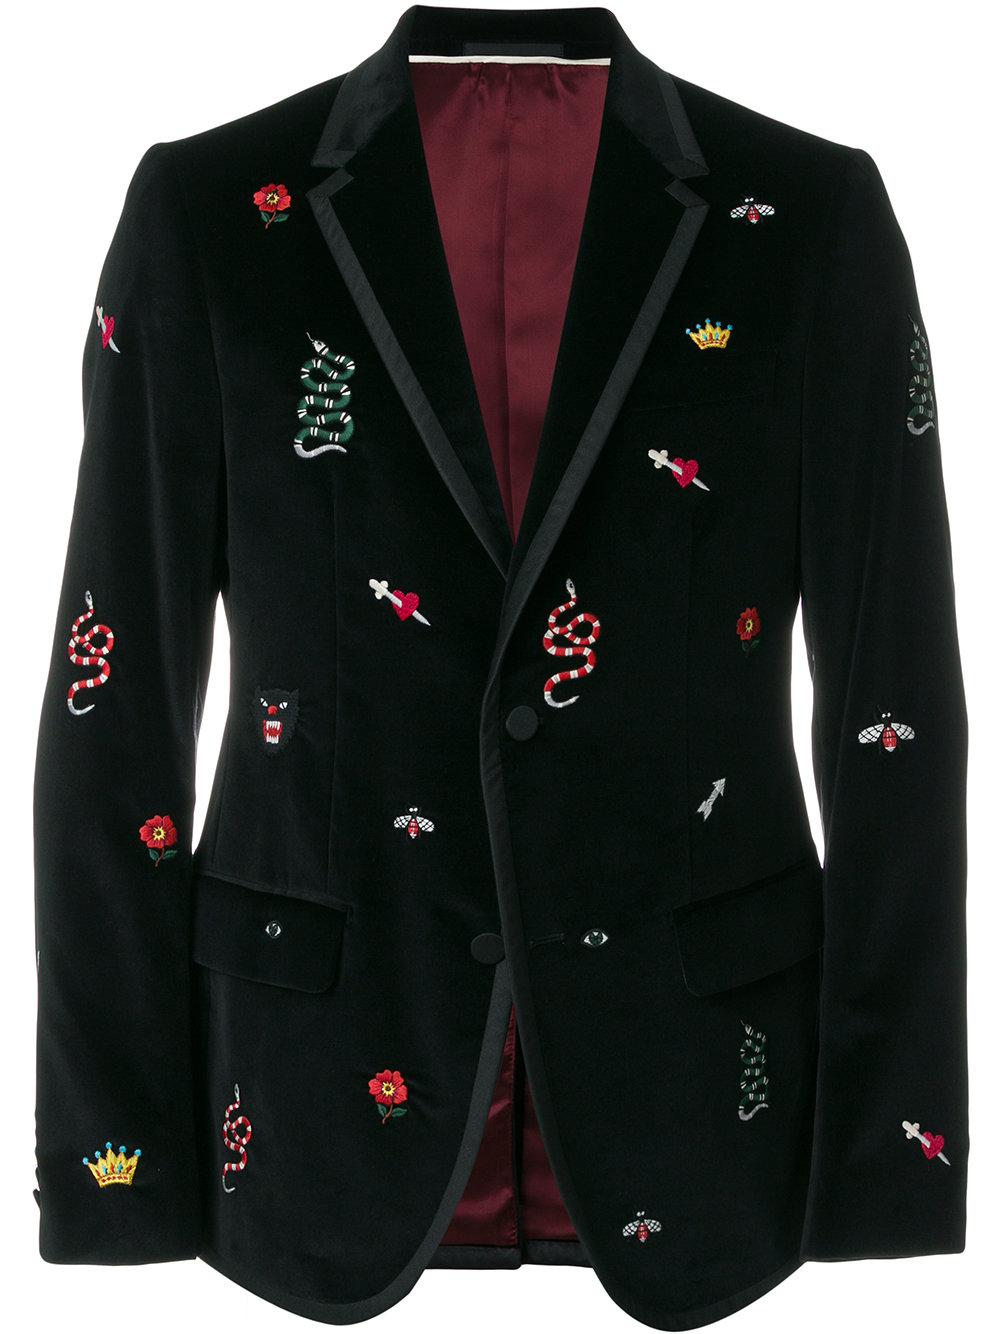 Lyst - Gucci Embroidered Monaco Jacket in Black for Men